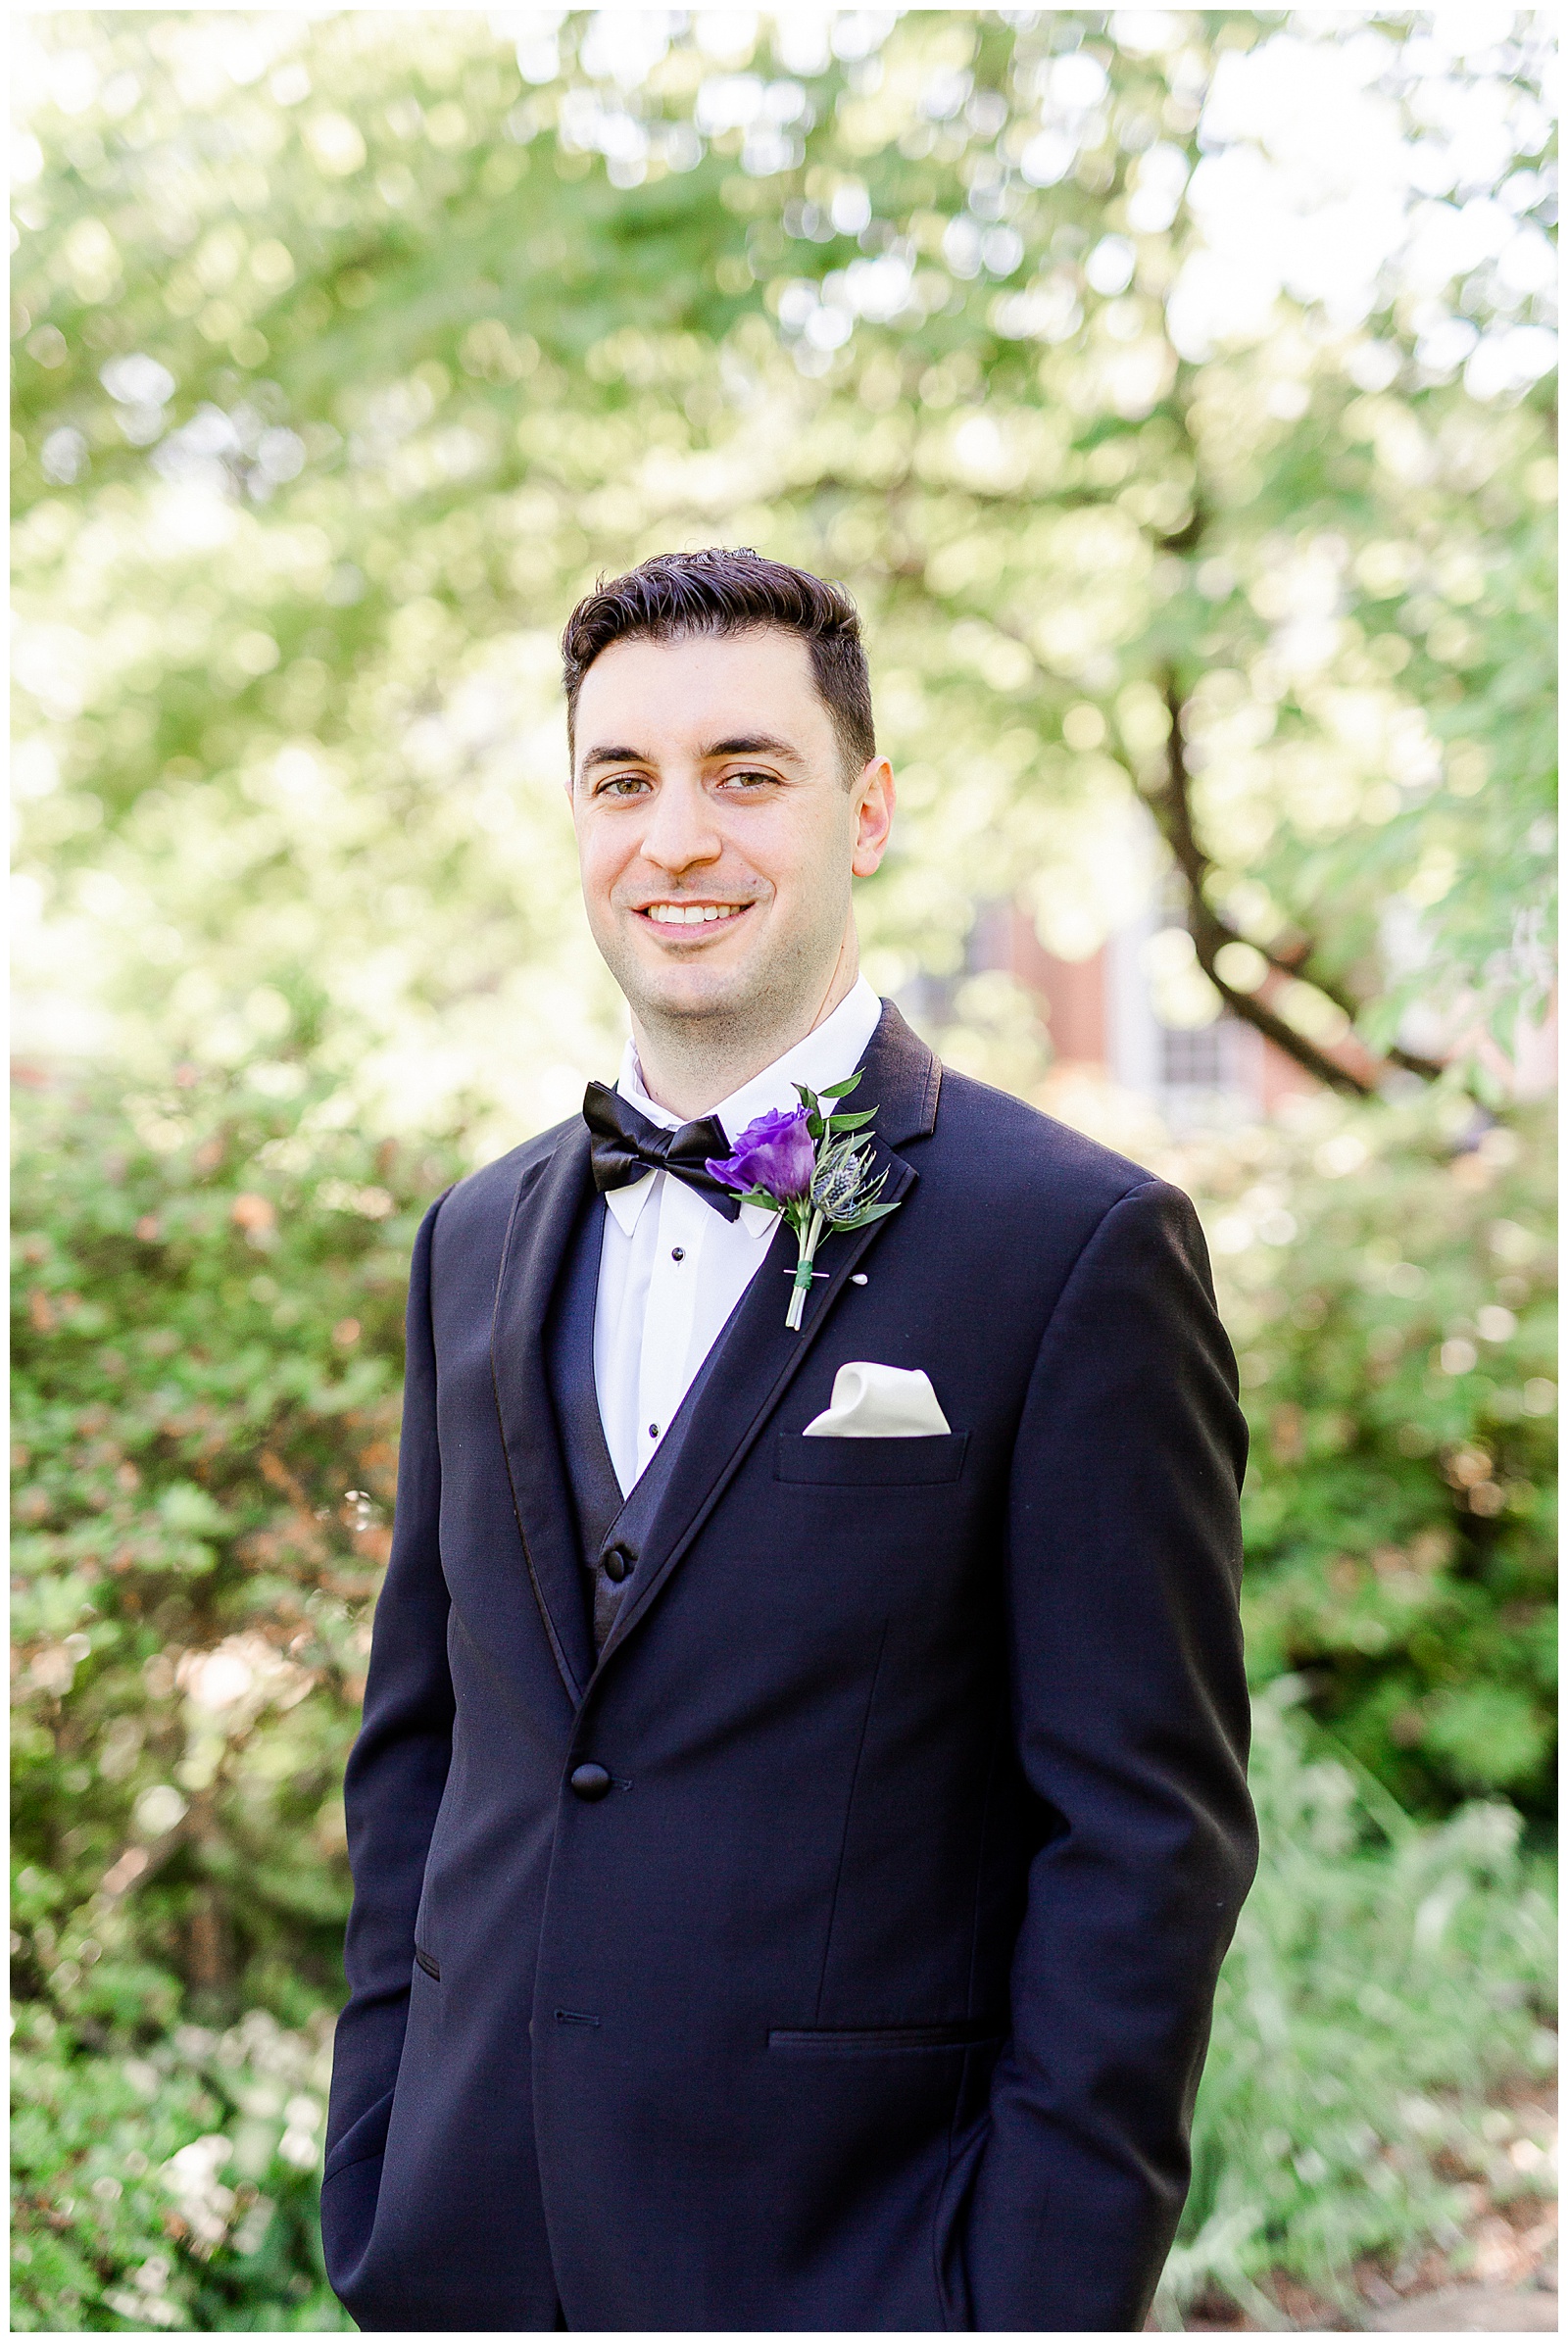 💍 groom getting ready portrait 🤵 Groom: black tux tuxedo and purple flower boutonnière 💍 Bright Colorful Summer City Wedding in Charlotte, NC with Taryn and Ryan | Kevyn Dixon Photography